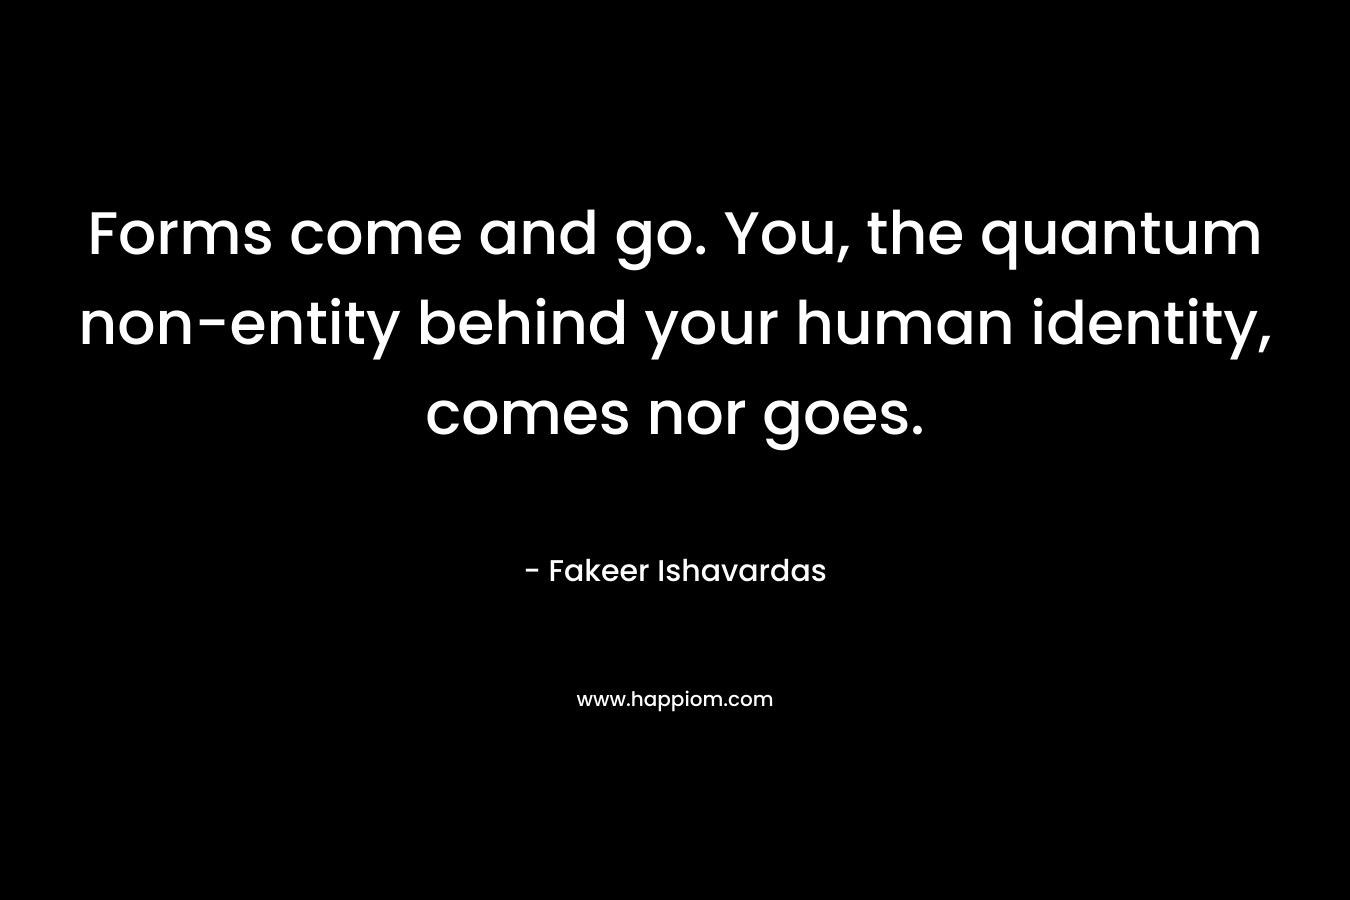 Forms come and go. You, the quantum non-entity behind your human identity, comes nor goes.